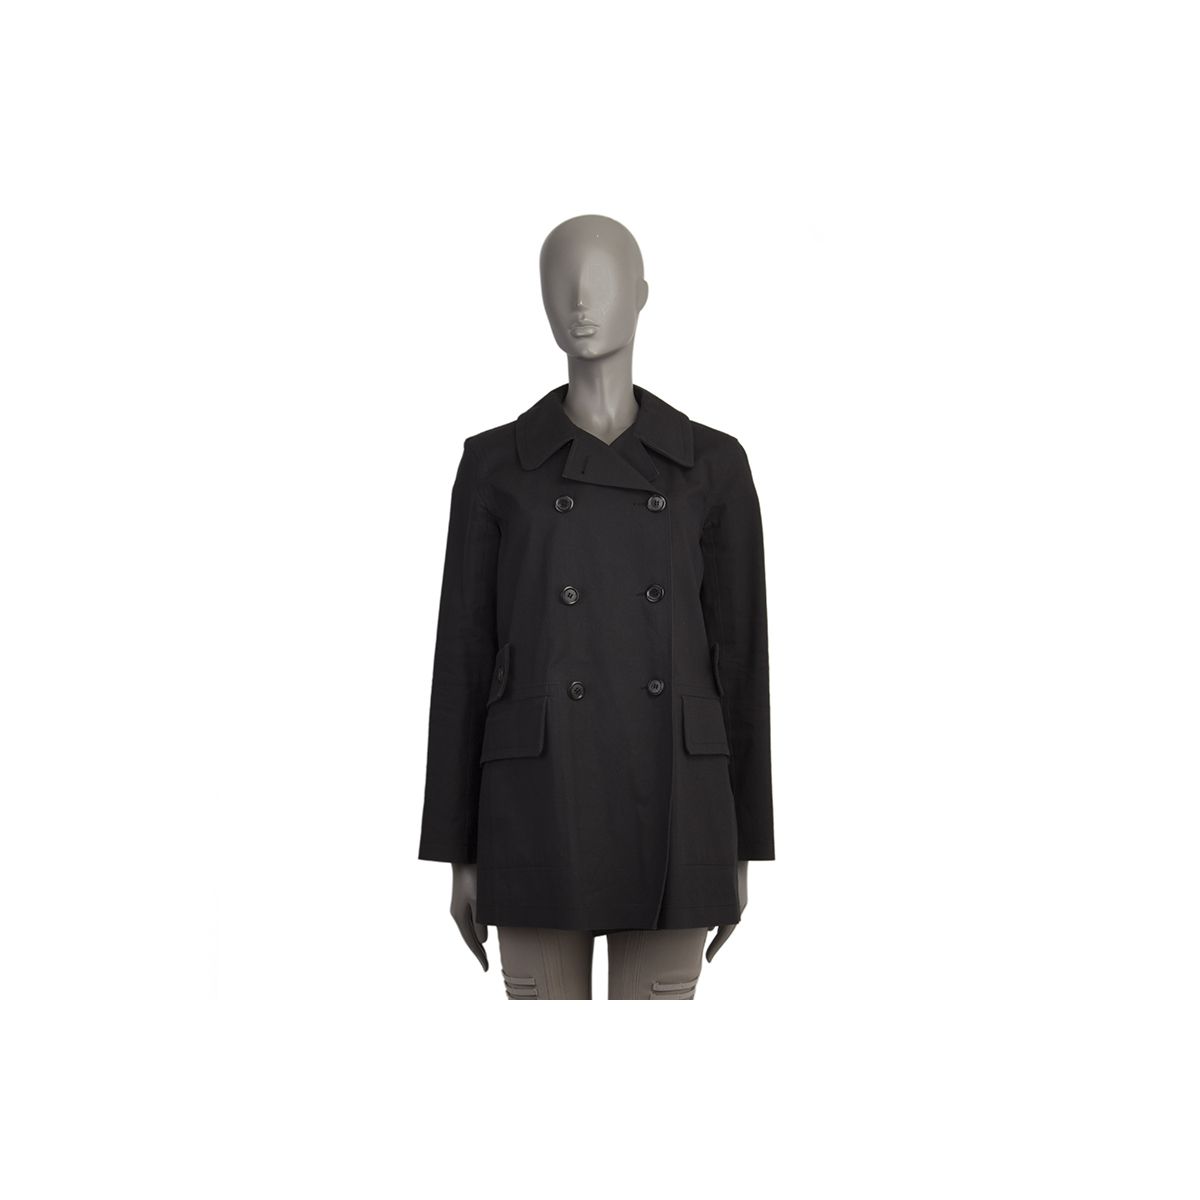 Louis Vuitton - Authenticated Trench Coat - Cotton Navy Plain For Woman, Very Good condition